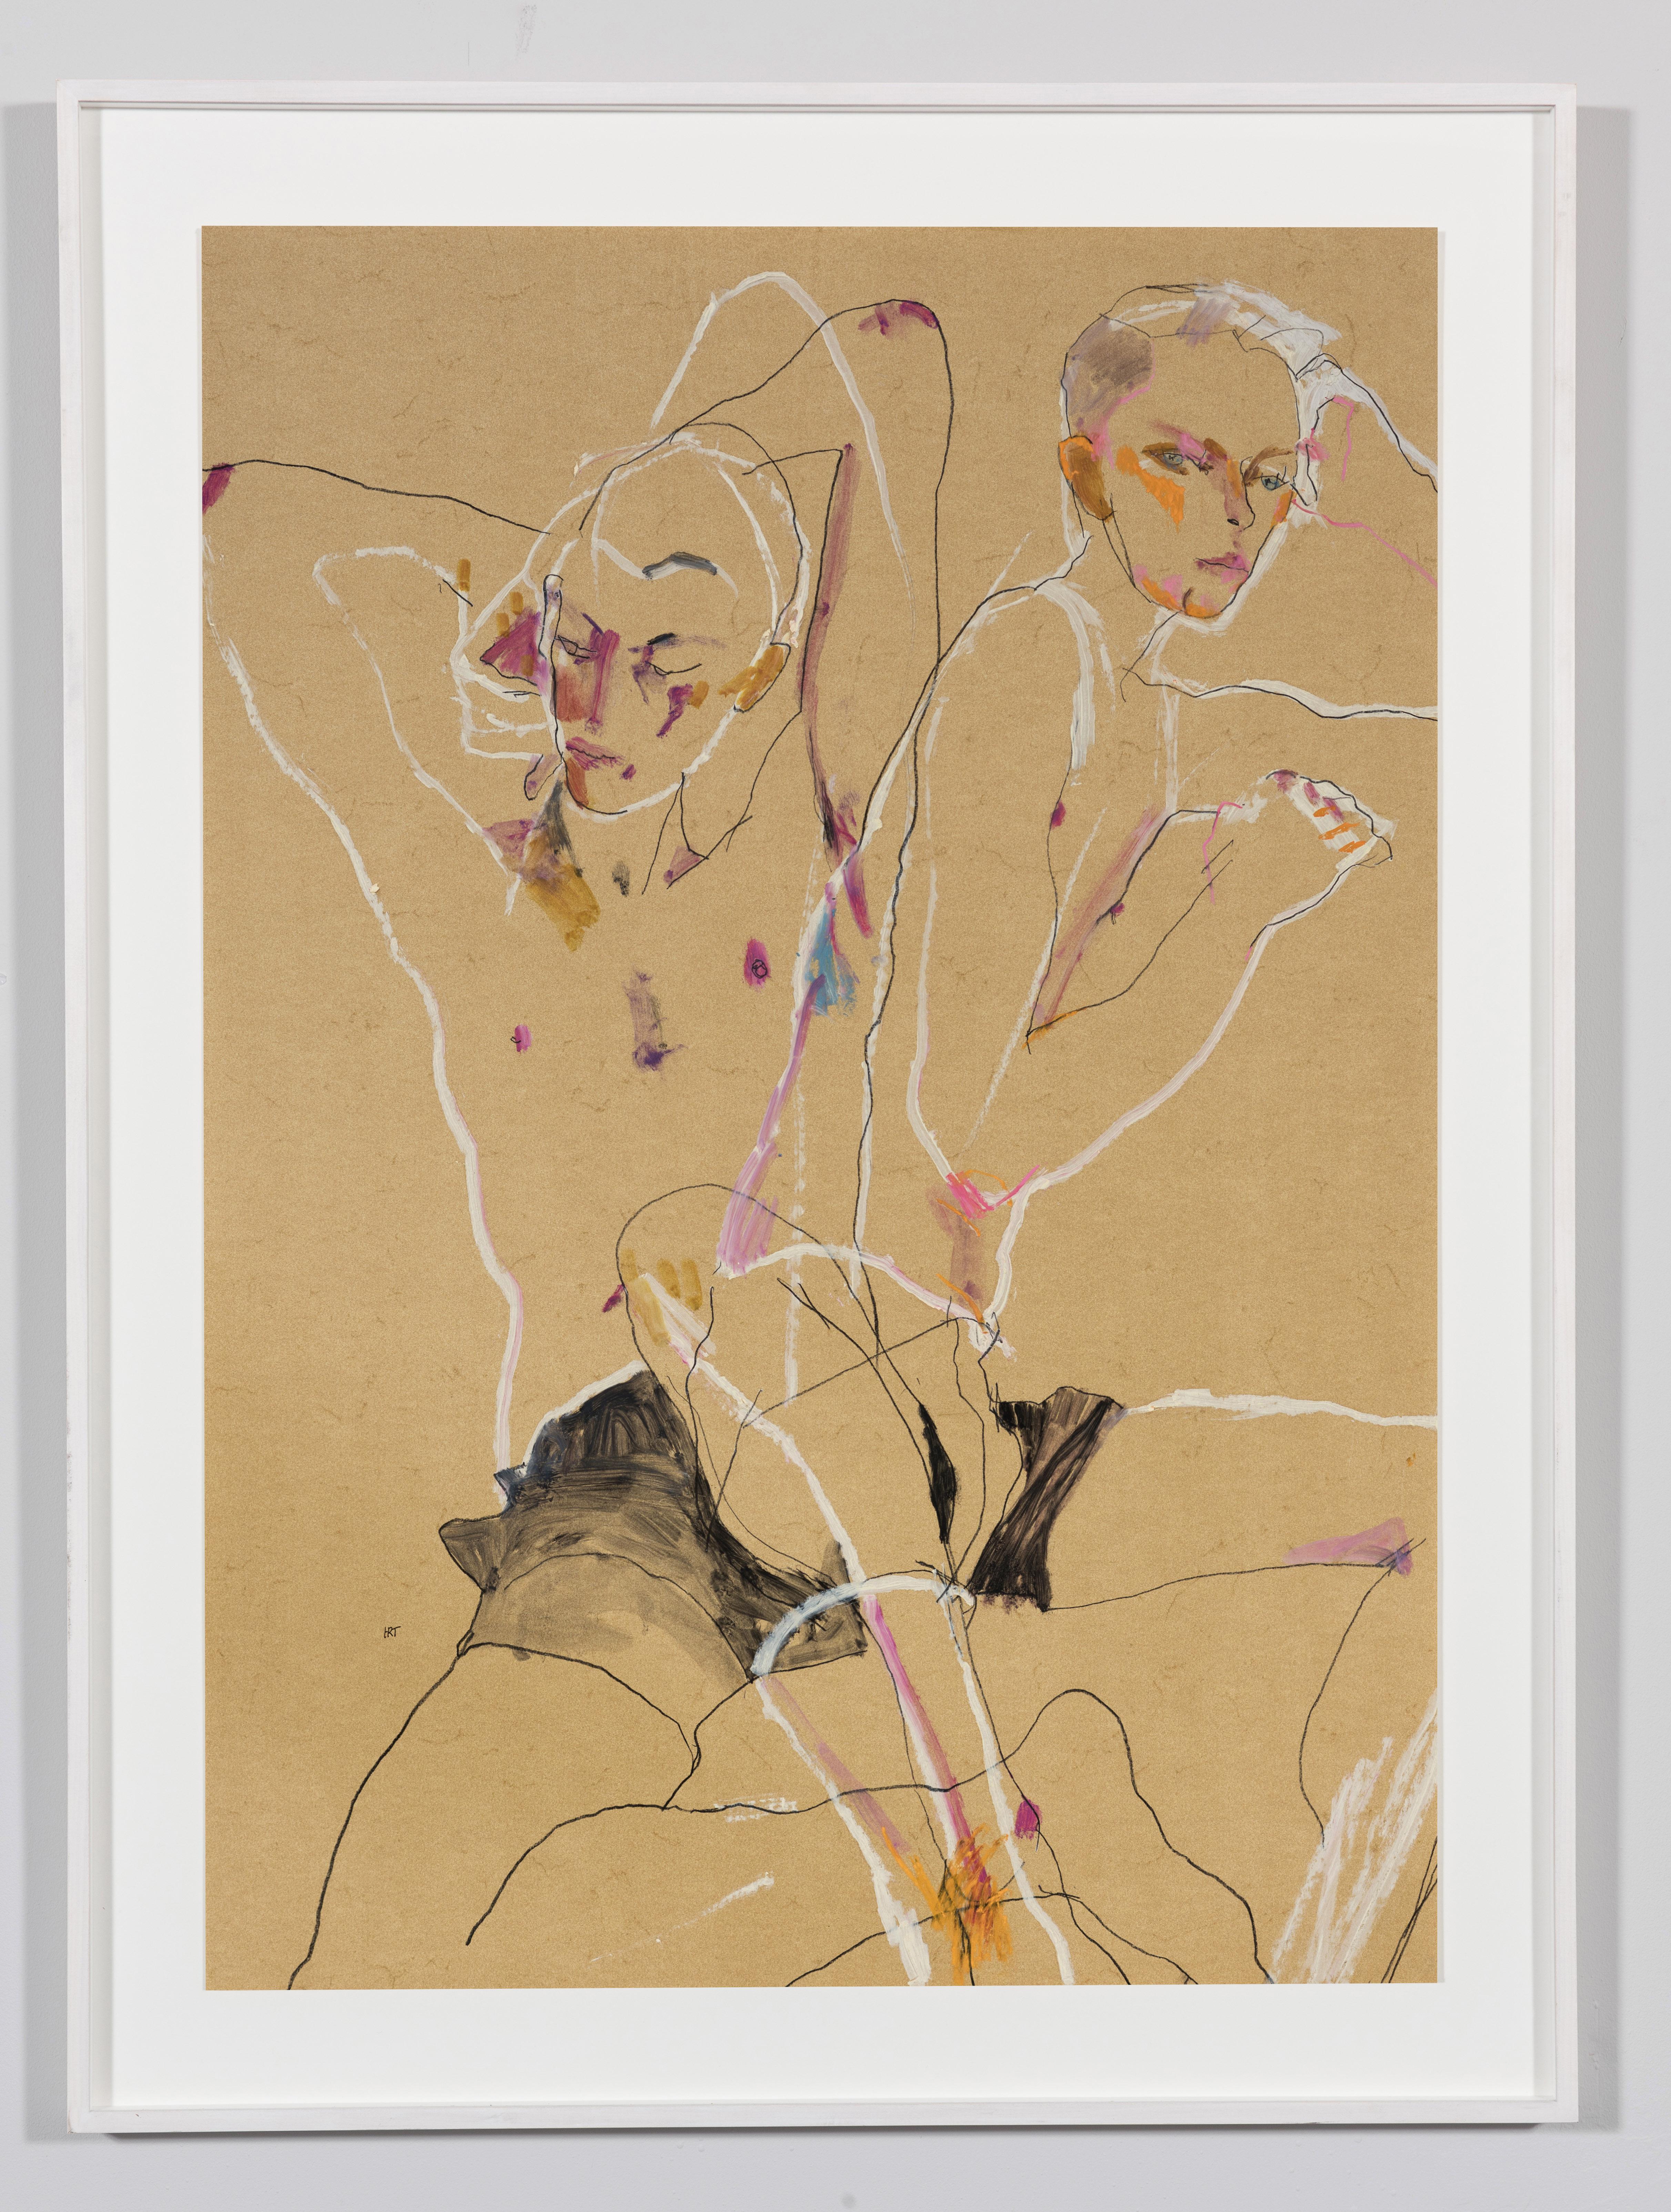 Matthew (Two Figures, Overlapping), Mixed media on ochre parchment - Painting by Howard Tangye